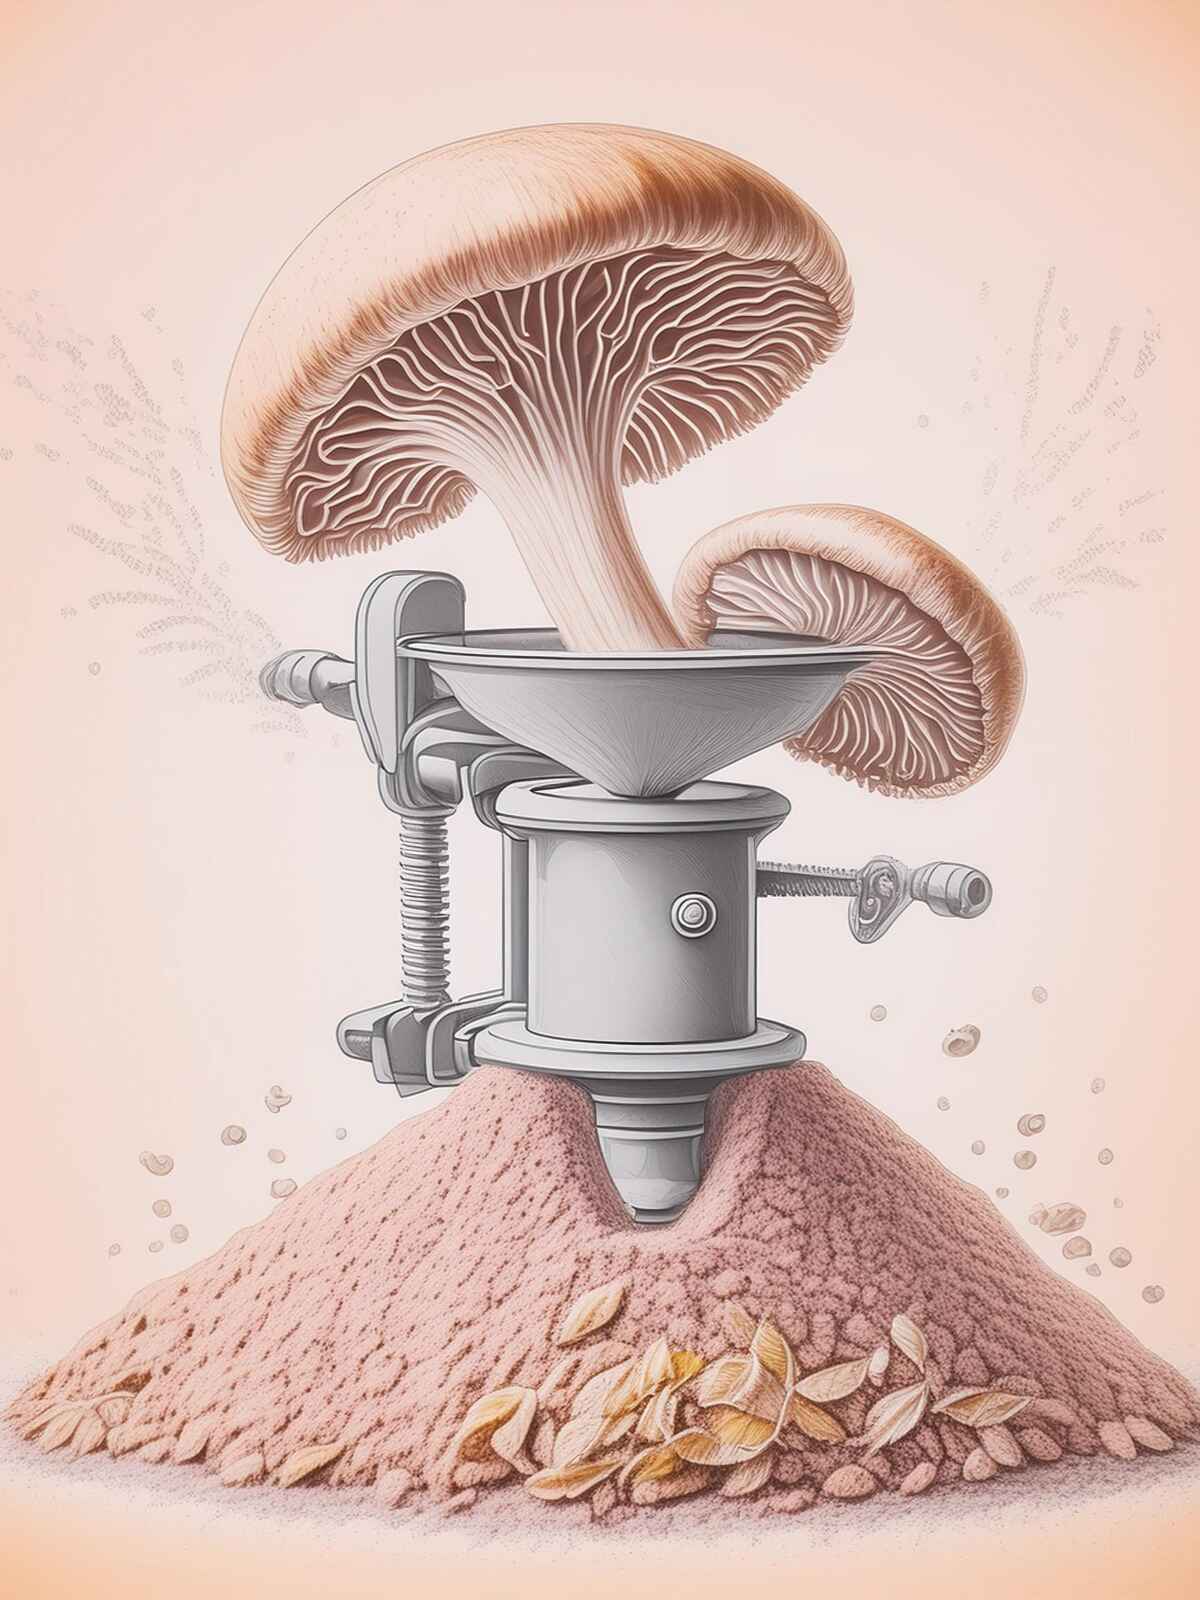 Drawing of a mushroom being milled into powder in a milling machine, illustrating the process of creating fine mushroom extracts.